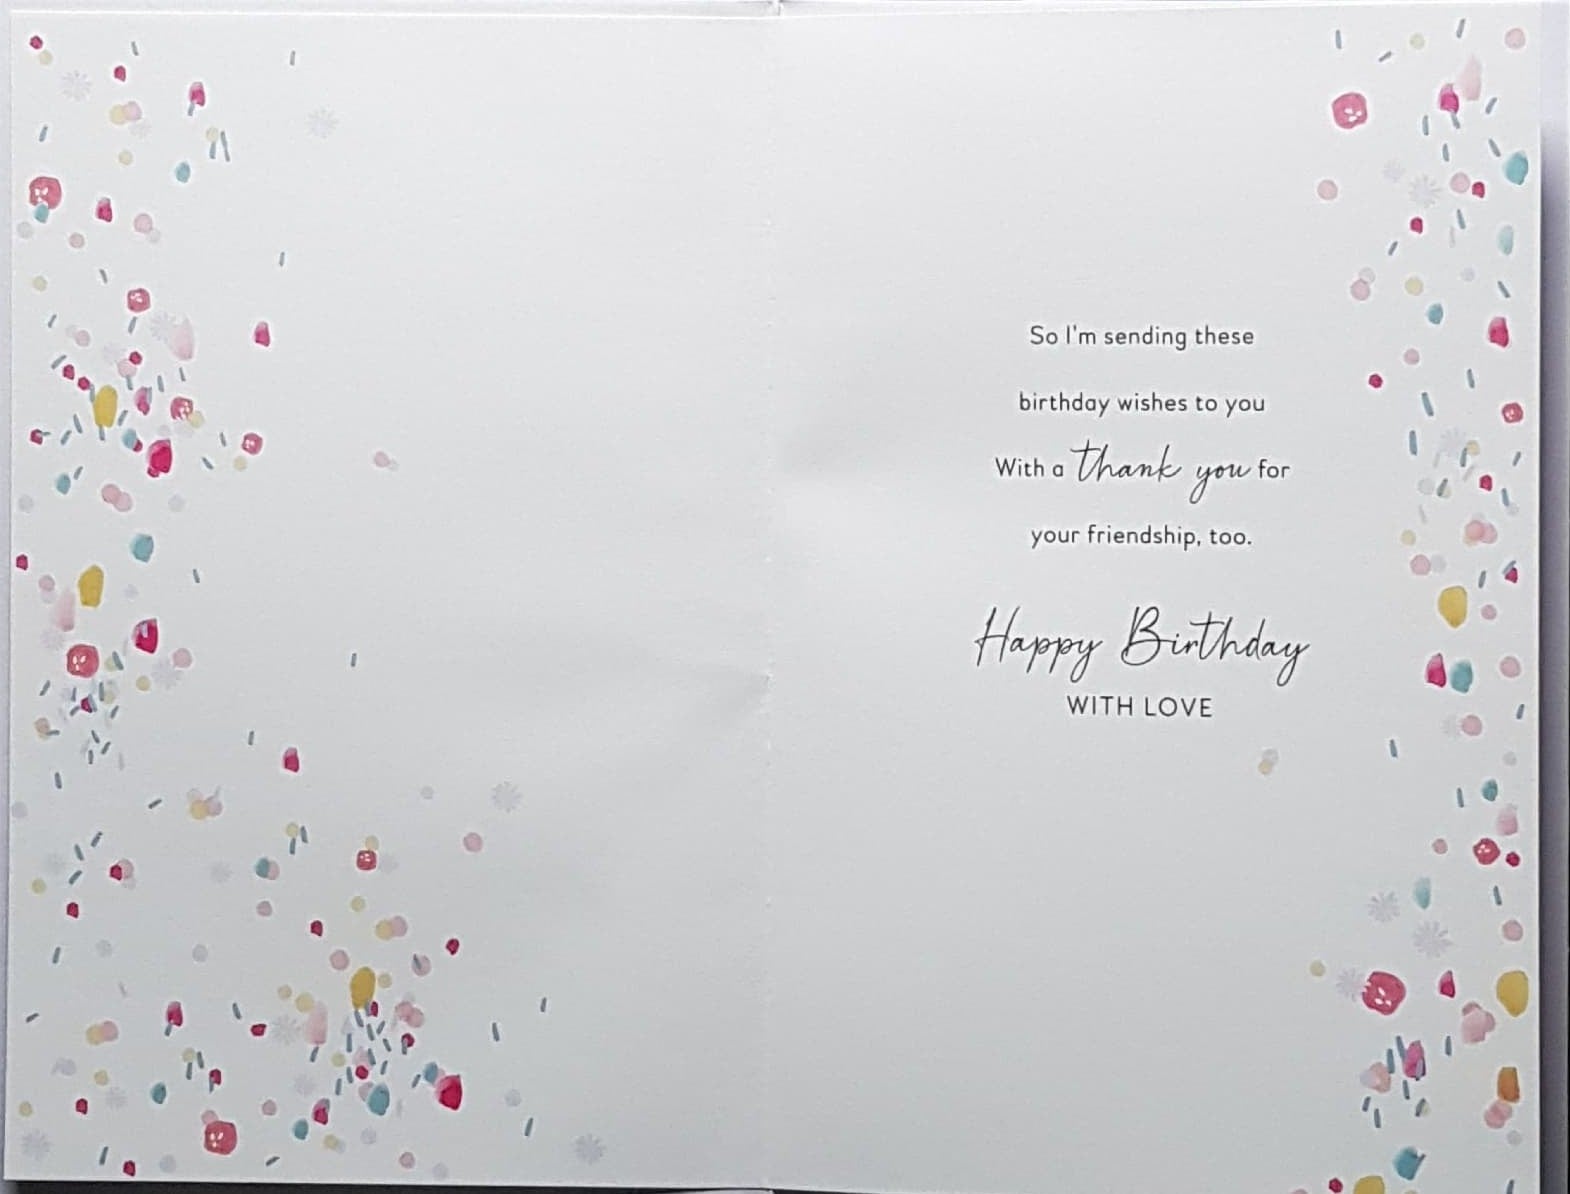 Birthday Card - Friend / 'You Are A Wonderful Friend' & Purple Front